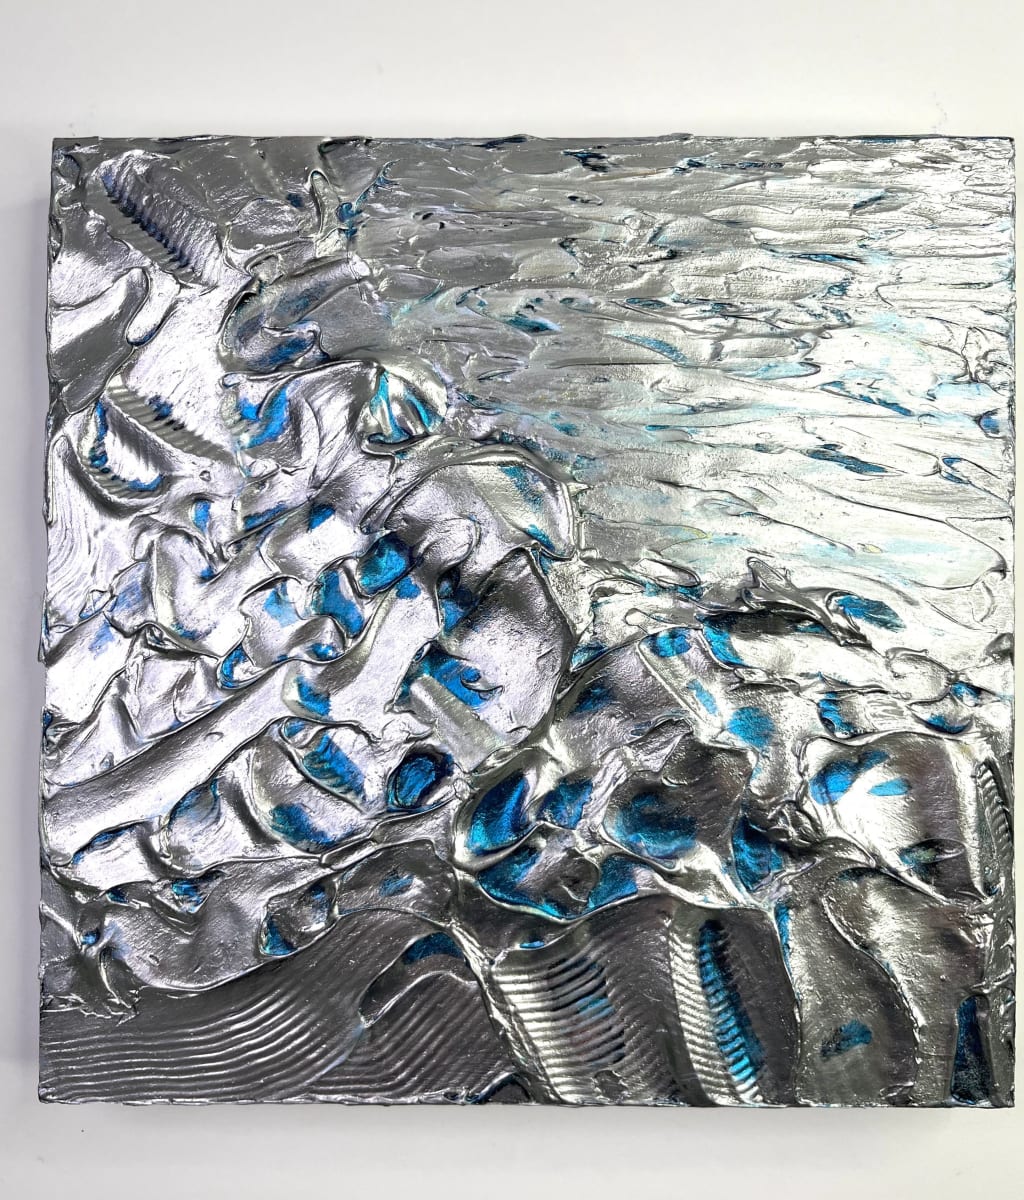 CAUGHT THE WAVE  Image: 12" x 12" x 1.5" Original 2D Interactive Sculptural Mixed Media painting on premier gallery profile cradled wood panel. Signed en verso. 